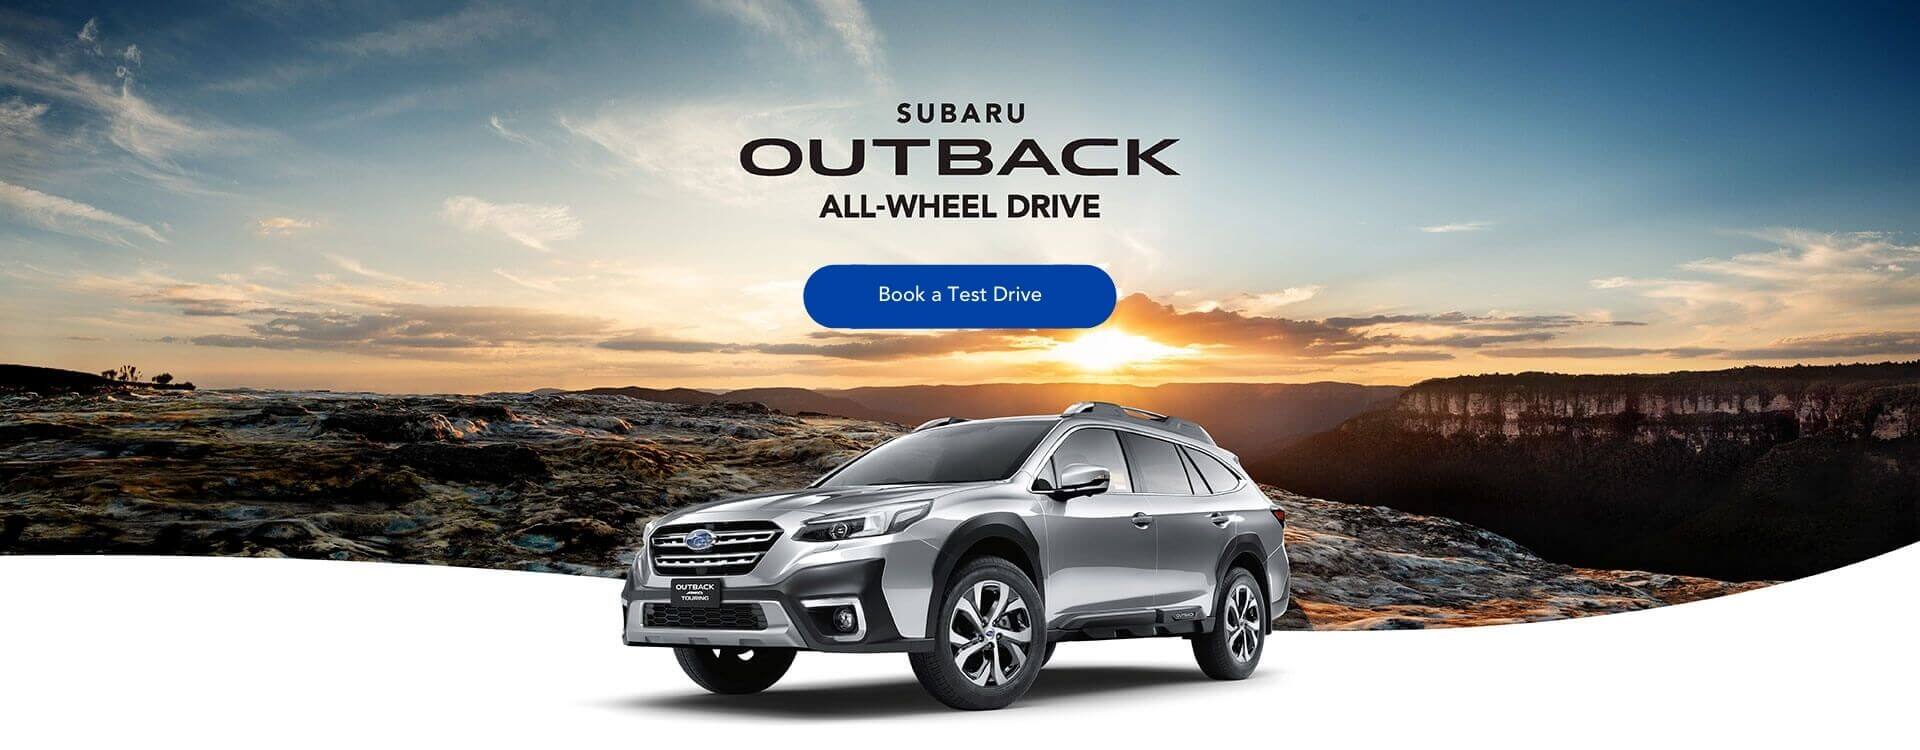 Discover the Subaru Outback All-Wheel Drive